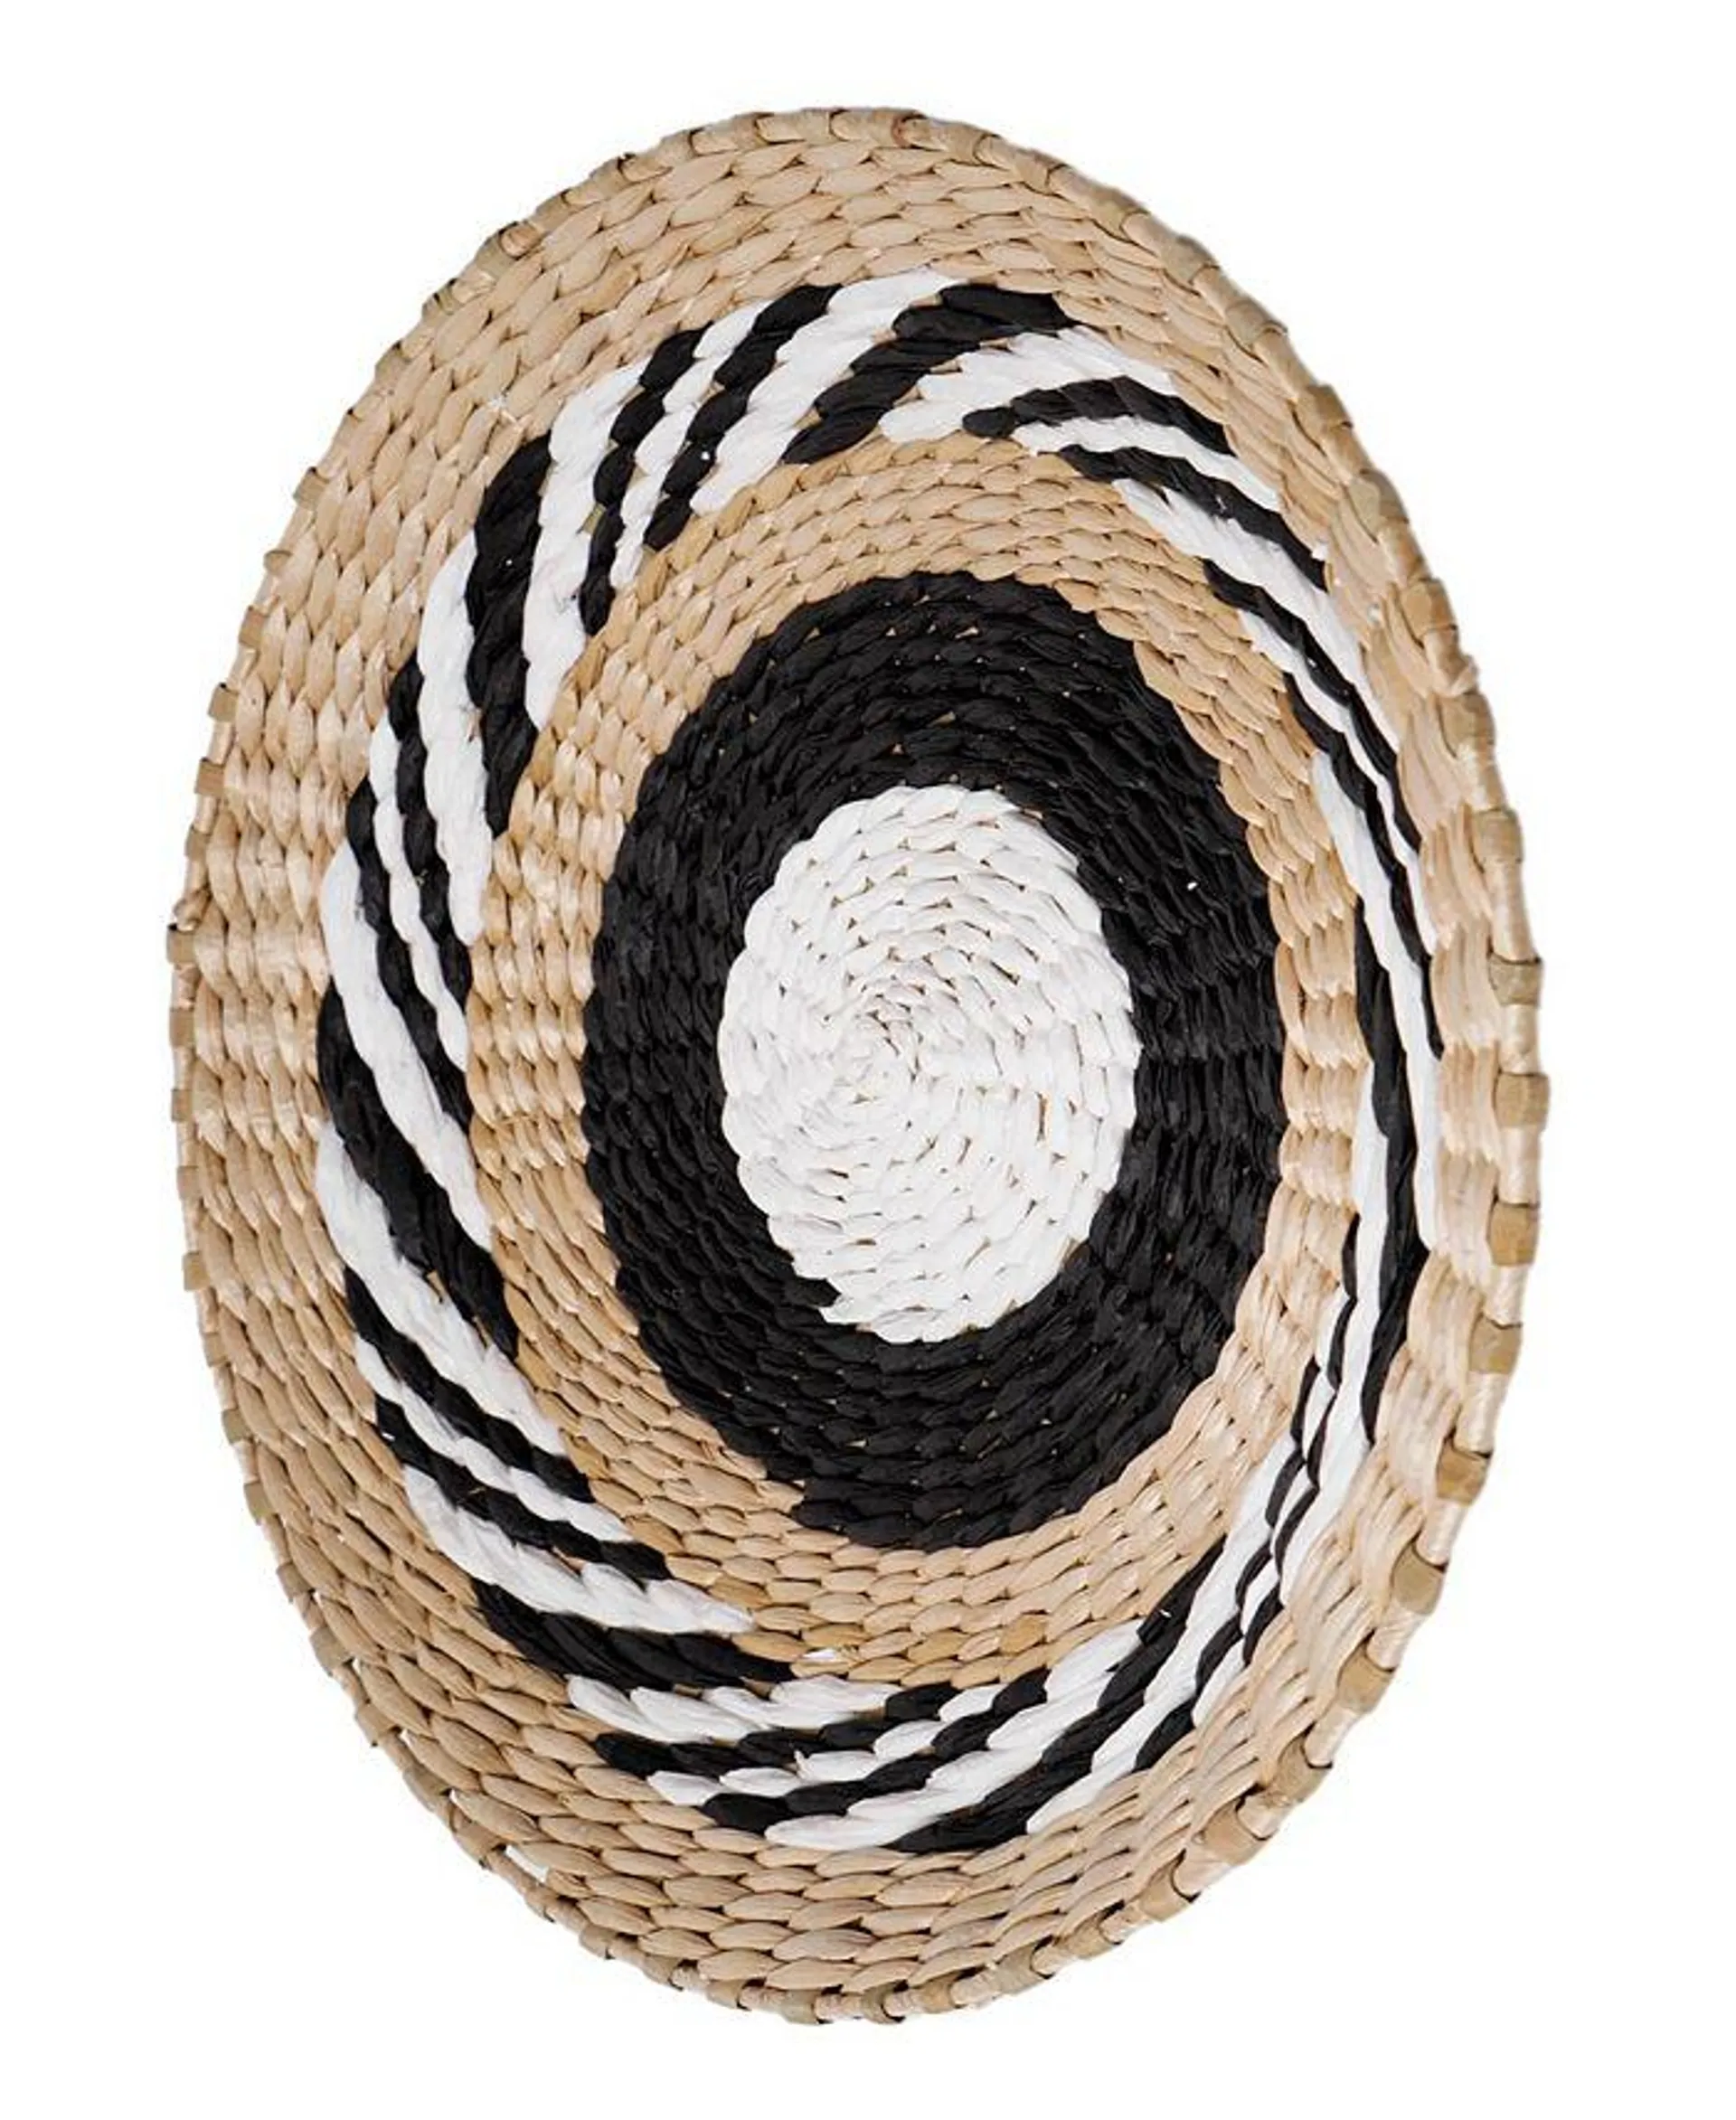 Woven Seaweed Hanging Wall Accent Basket, 16"